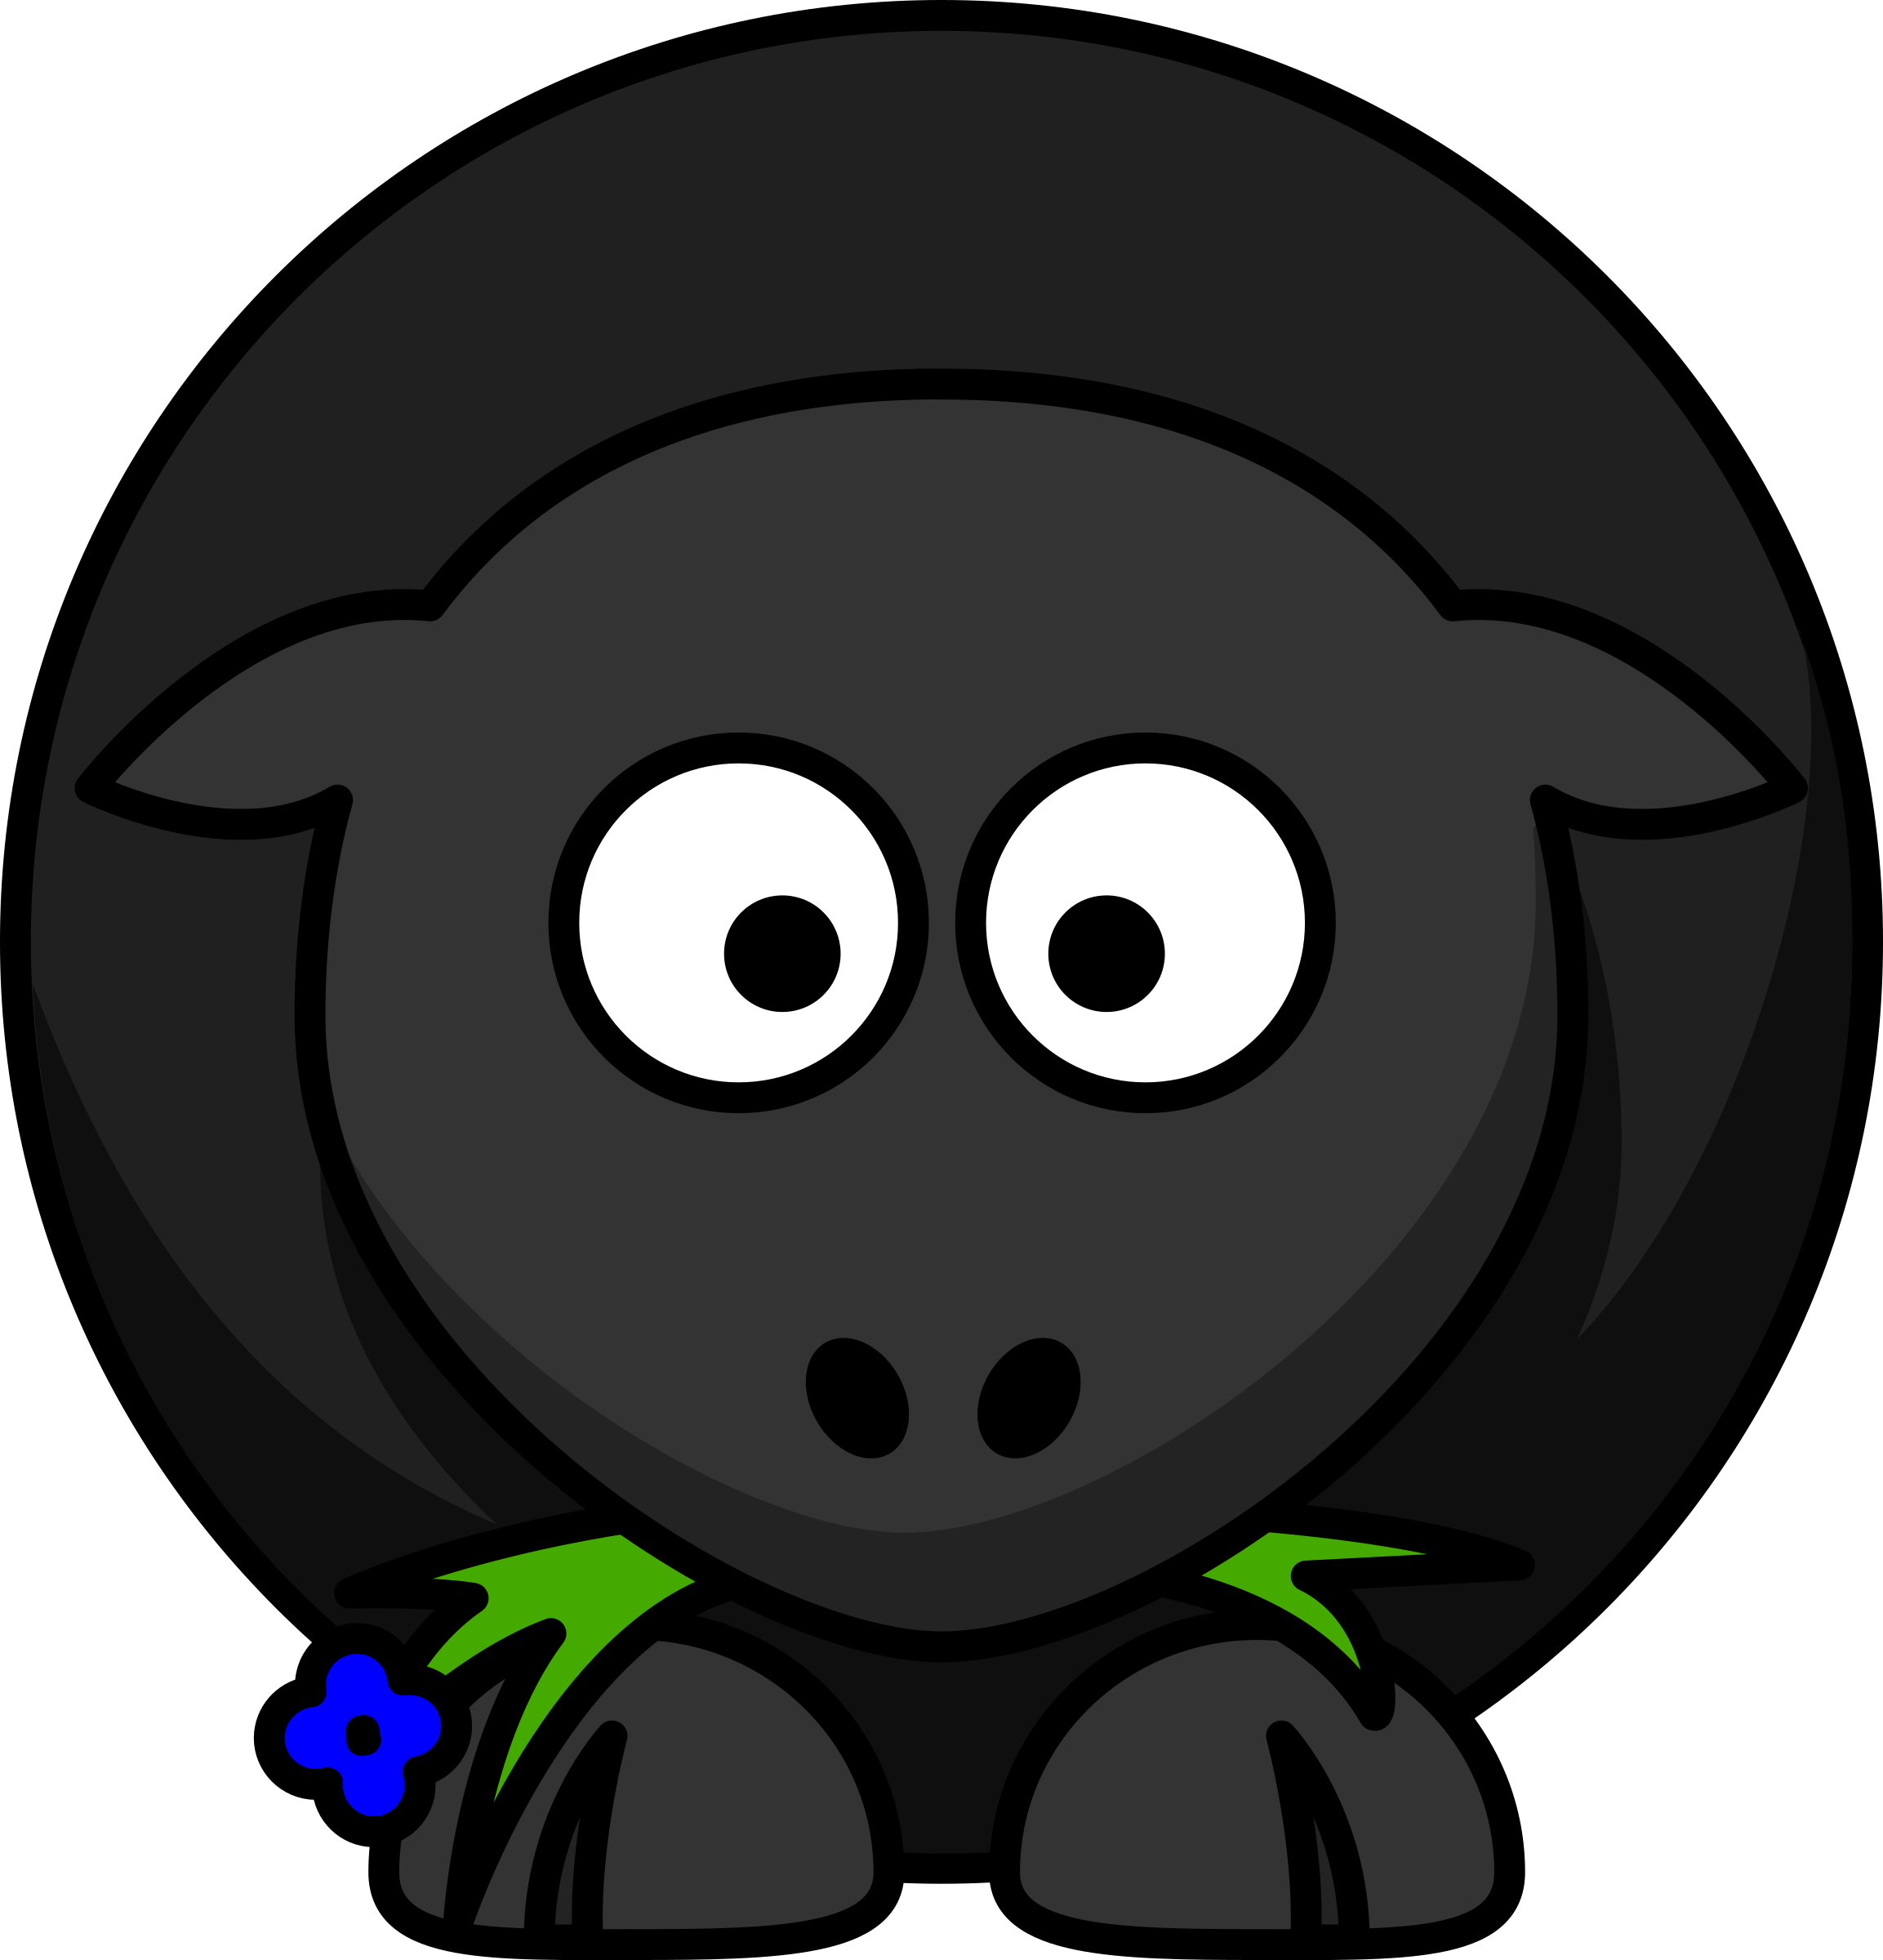 Clipart of Young Black Sheep